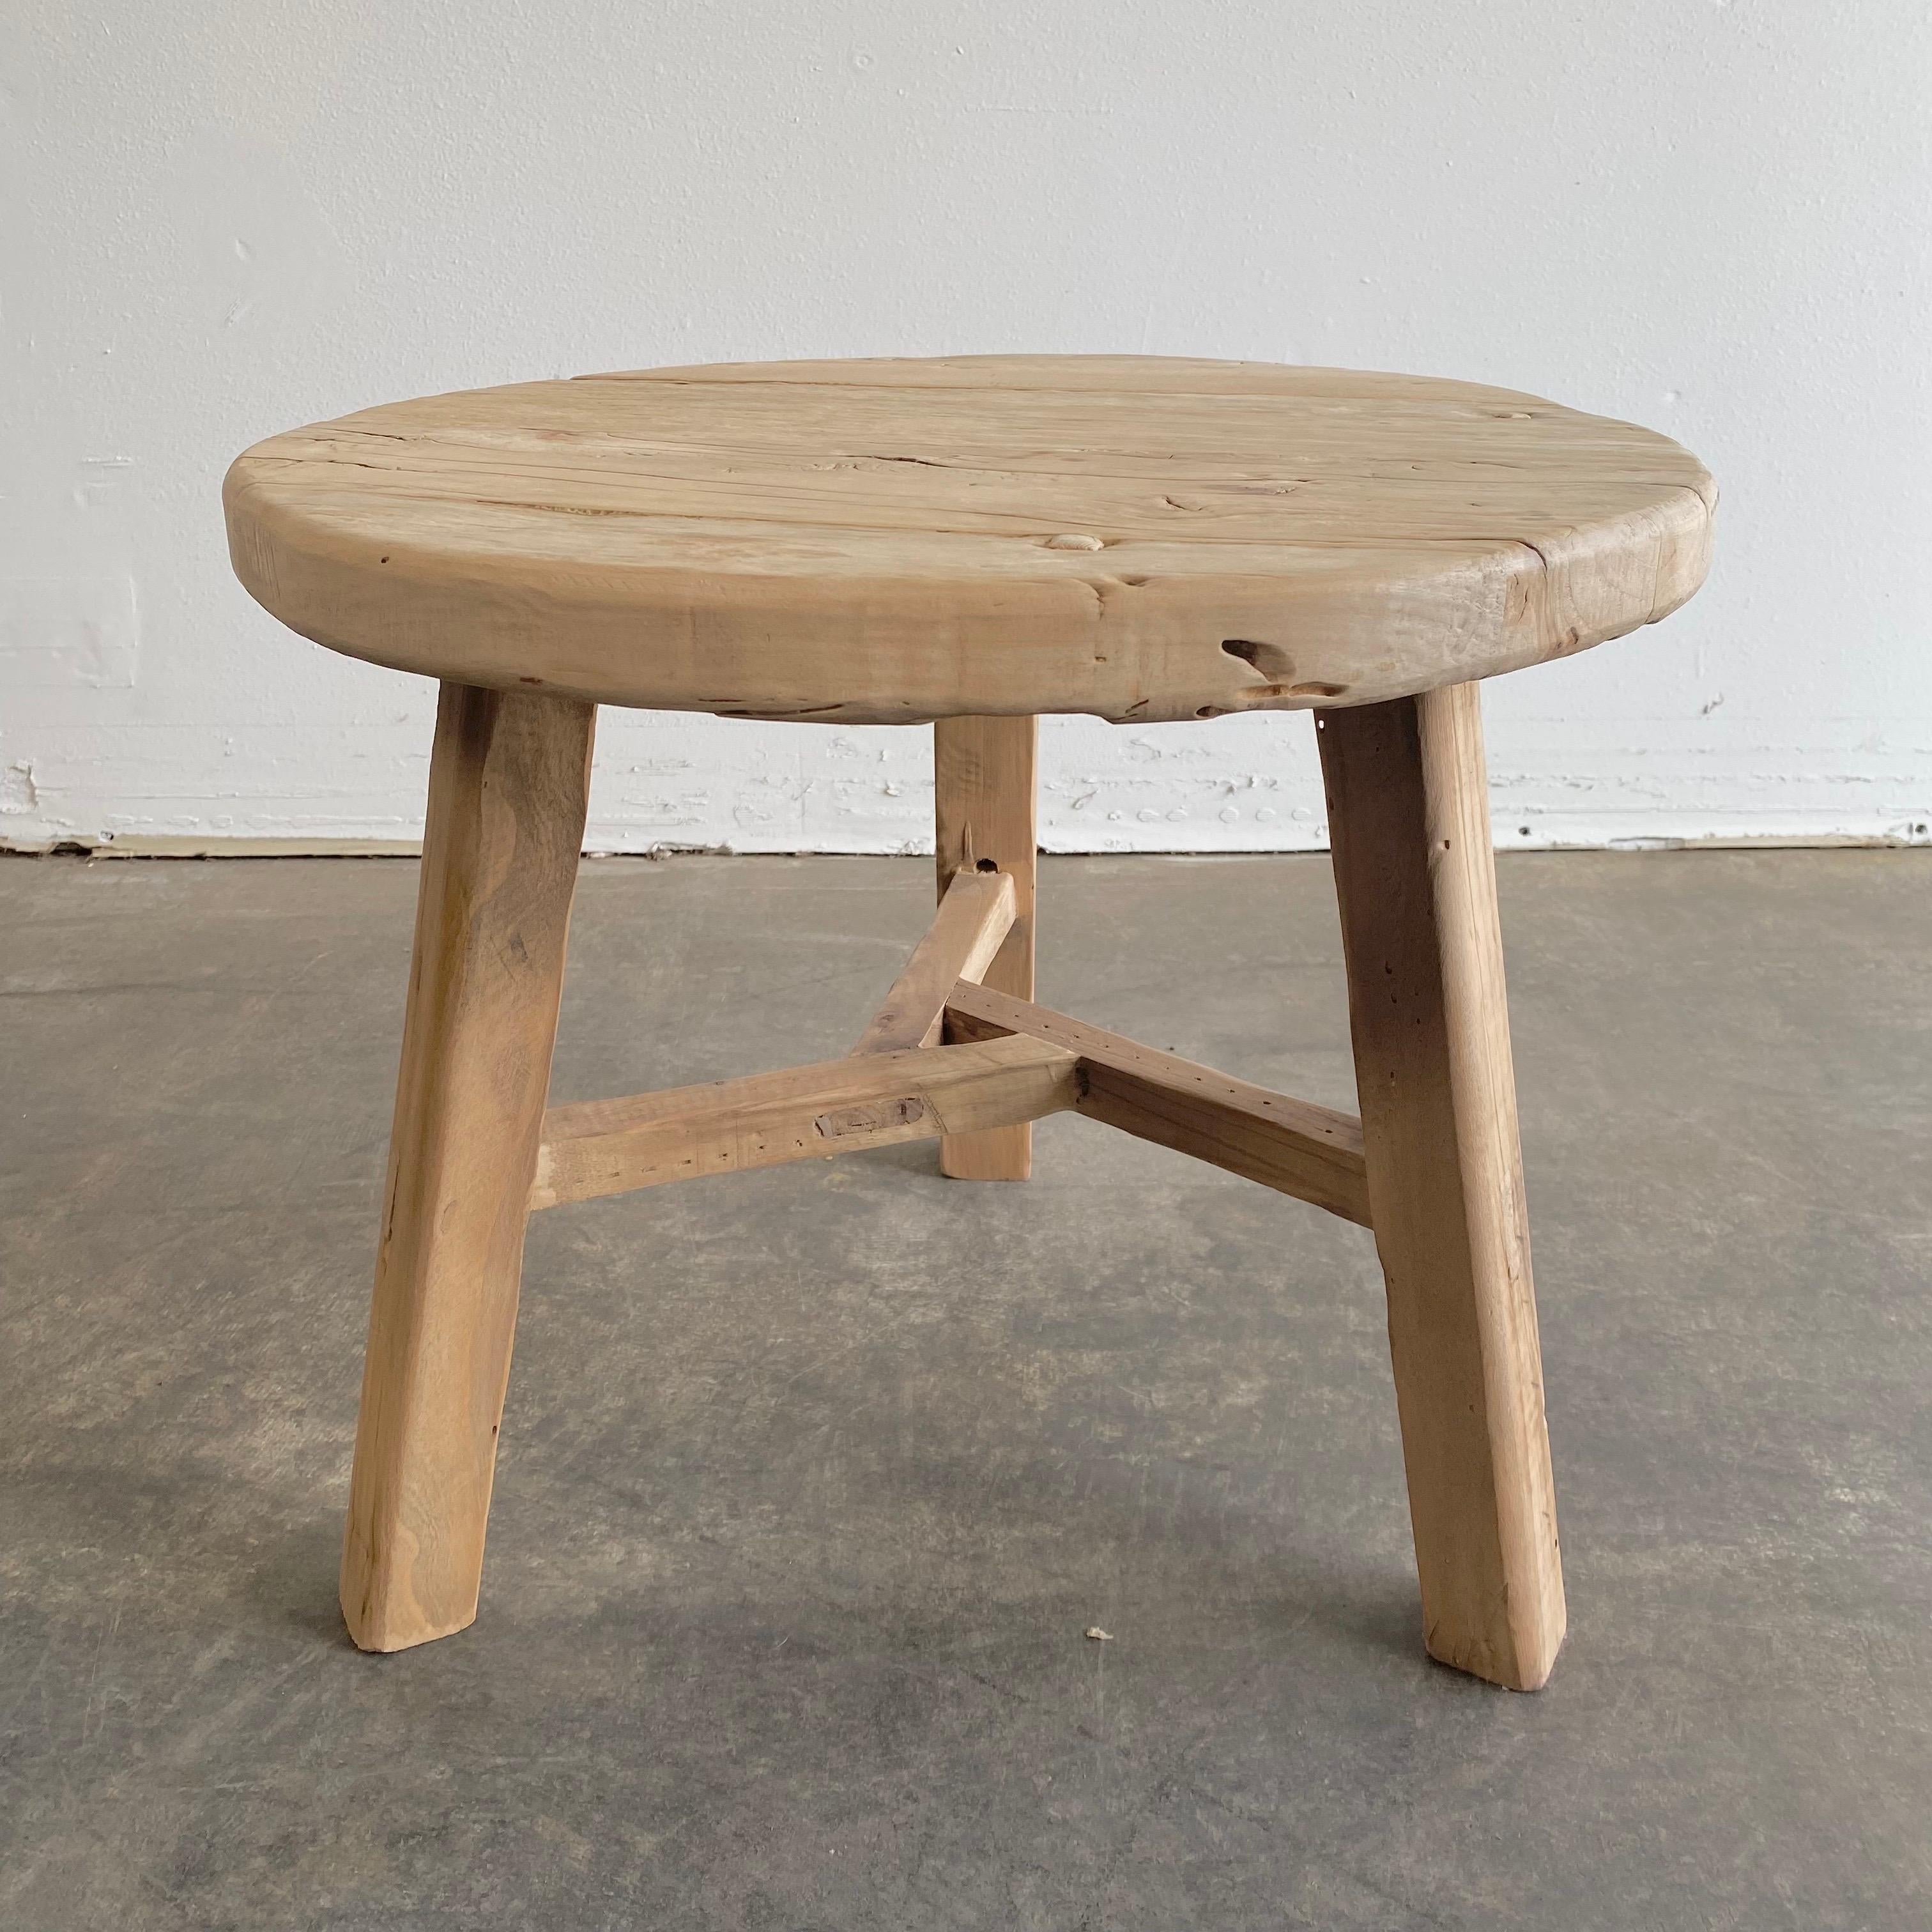 Round natural side table made from reclaimed elmwood Raw natural finish, a warm honey with gray tones in the wood. Solid and sturdy, a great side table for next to a bed, sofa, chairs. Can be stained or painted for a customized look.
 Size: 21